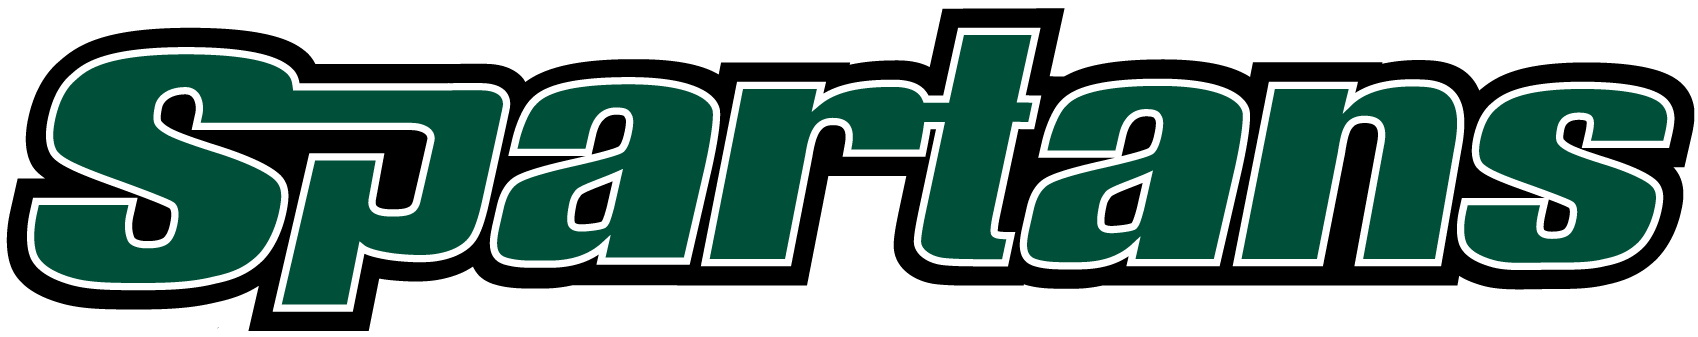 USC Upstate Spartans 2003-2010 Wordmark Logo iron on transfers for clothing